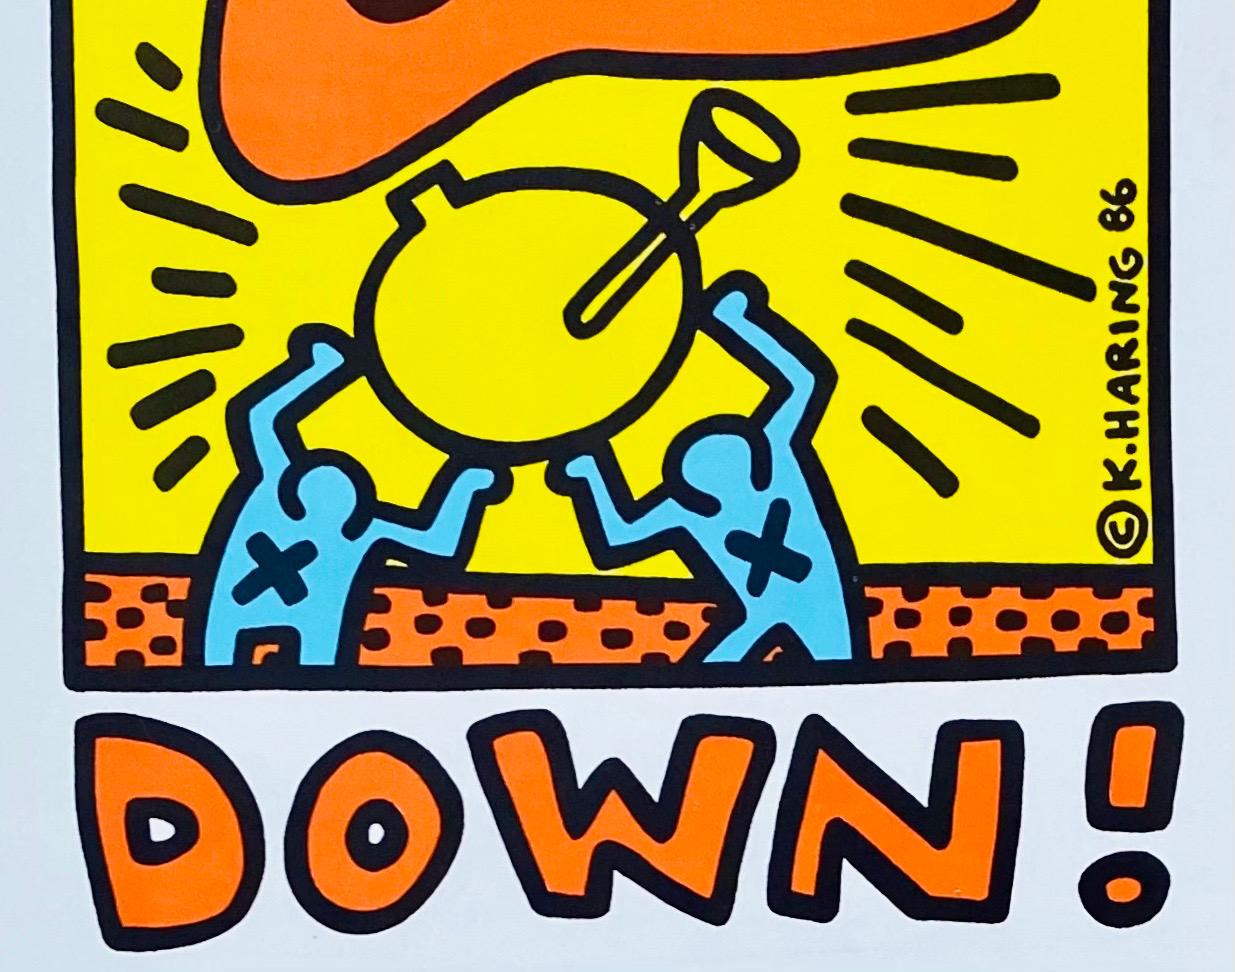 Keith Haring Crack Down! 1986:
Vintage original 1986 Keith Haring illustrated Crack Down! Benefit program.

Offset lithograph on folding announcement cover, 9 x 6 inches (folding open to 9x12 inches); unused and in very good vintage condition